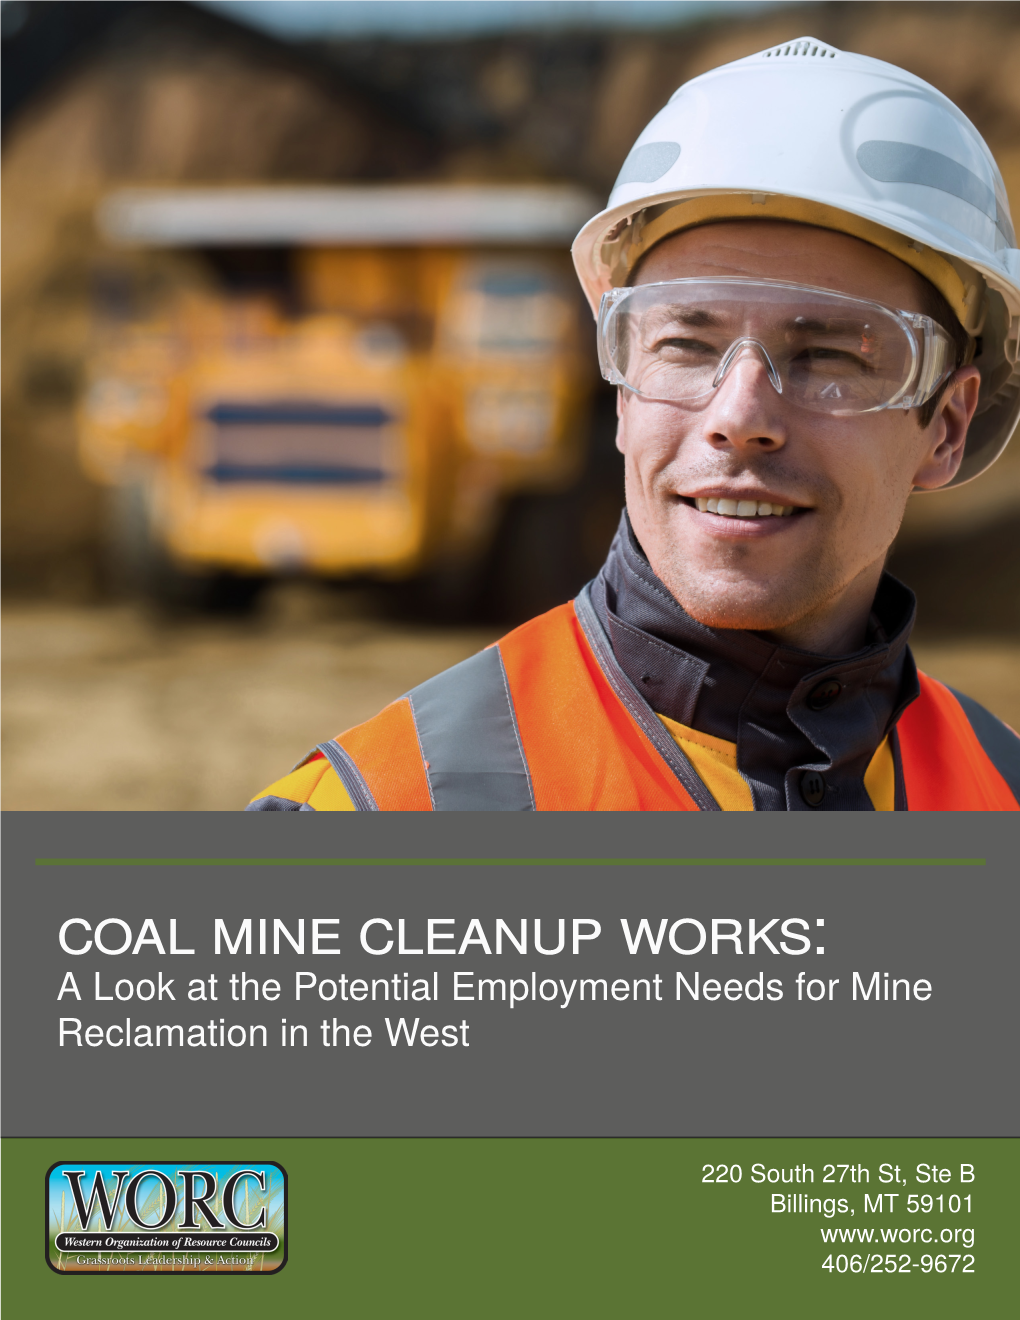 Coal Mine Cleanup Works: a Look at the Potential Employment Needs for Mine Reclamation in the West